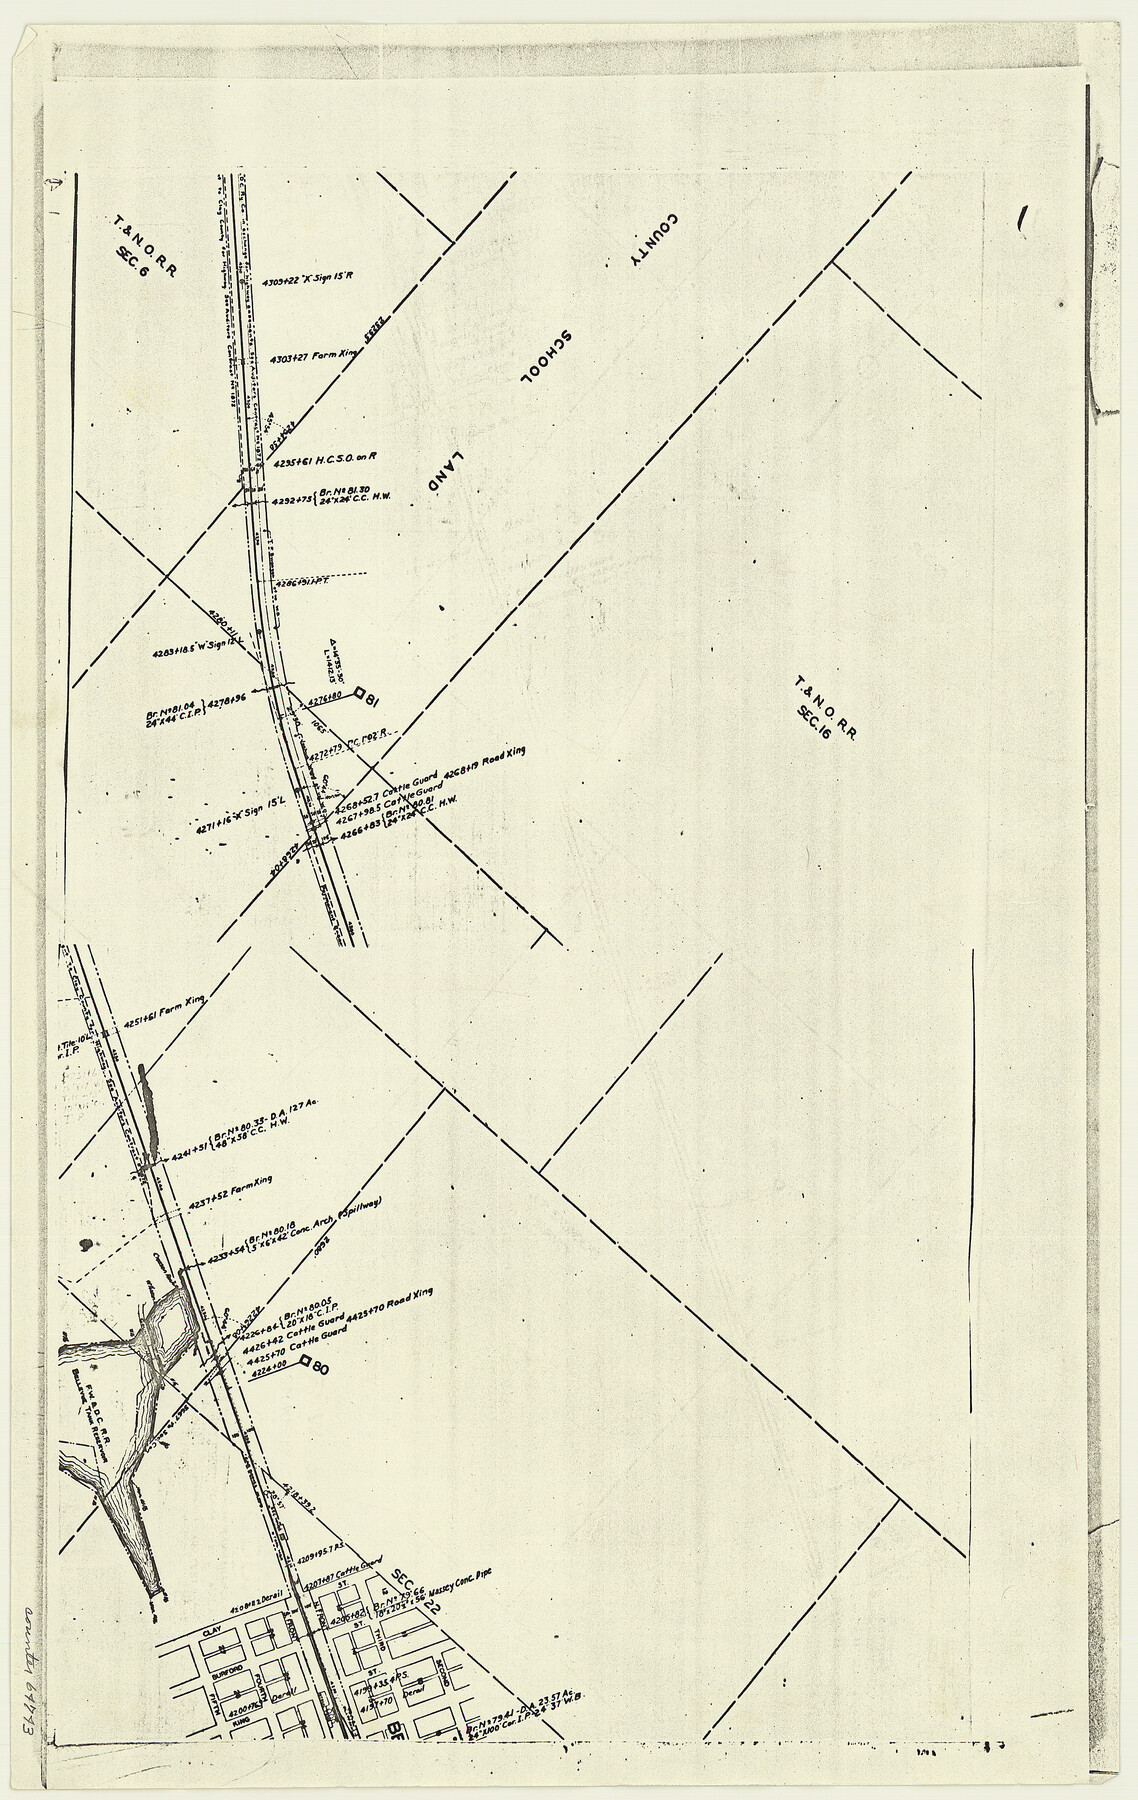 64743, [F. W. & D. C. Ry. Co. Alignment and Right of Way Map, Clay County], General Map Collection